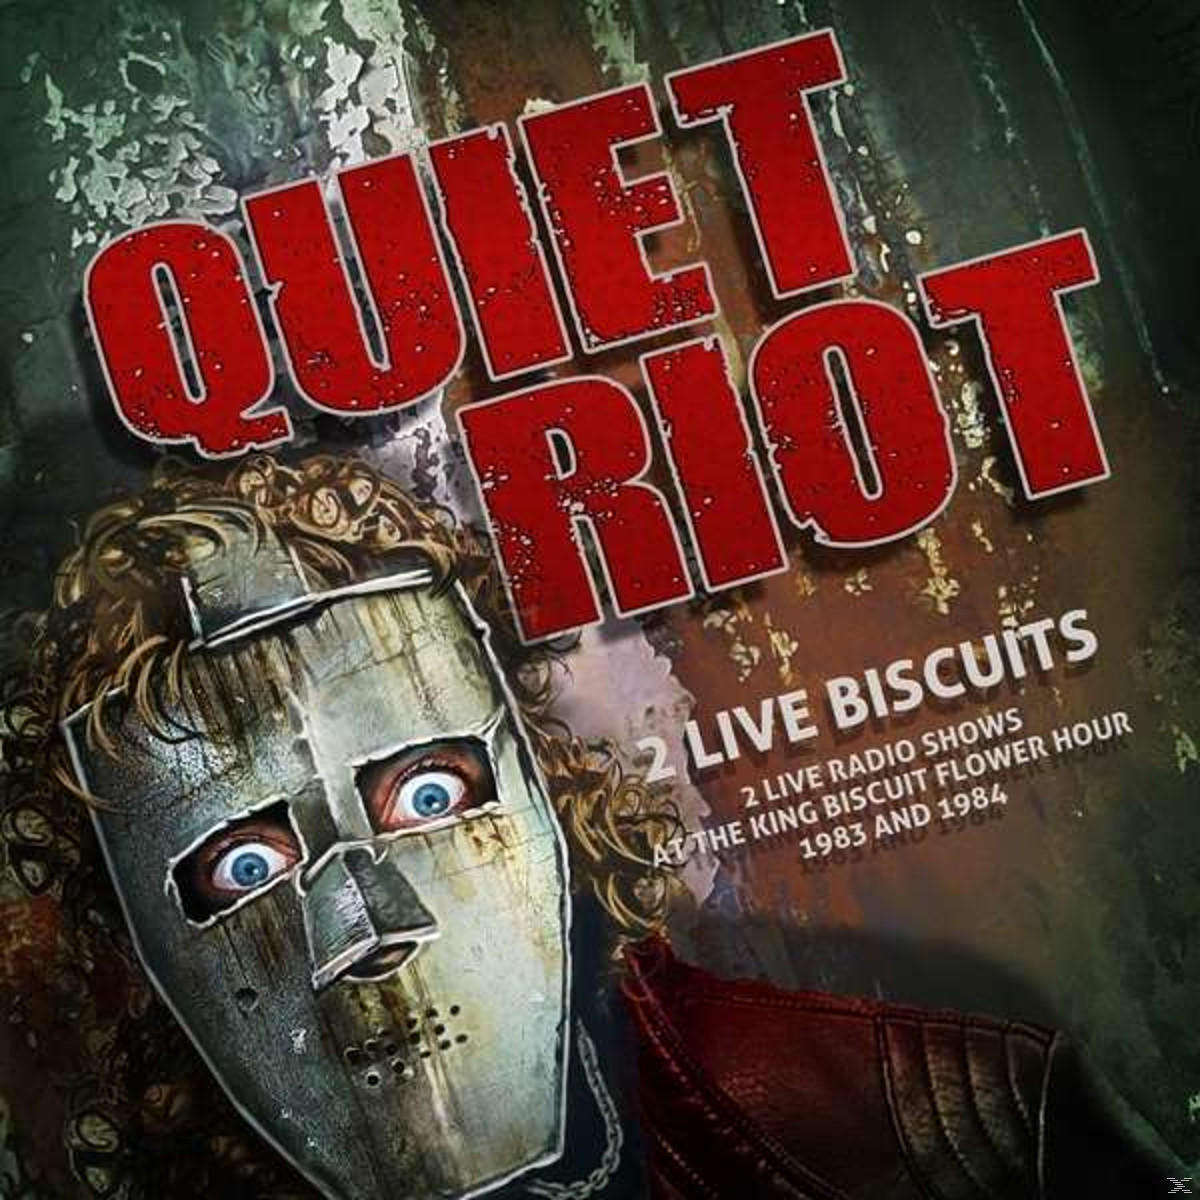 Quiet Riot - The Biscuits-2 Radio Shows 2 Live Live - (CD) King B At